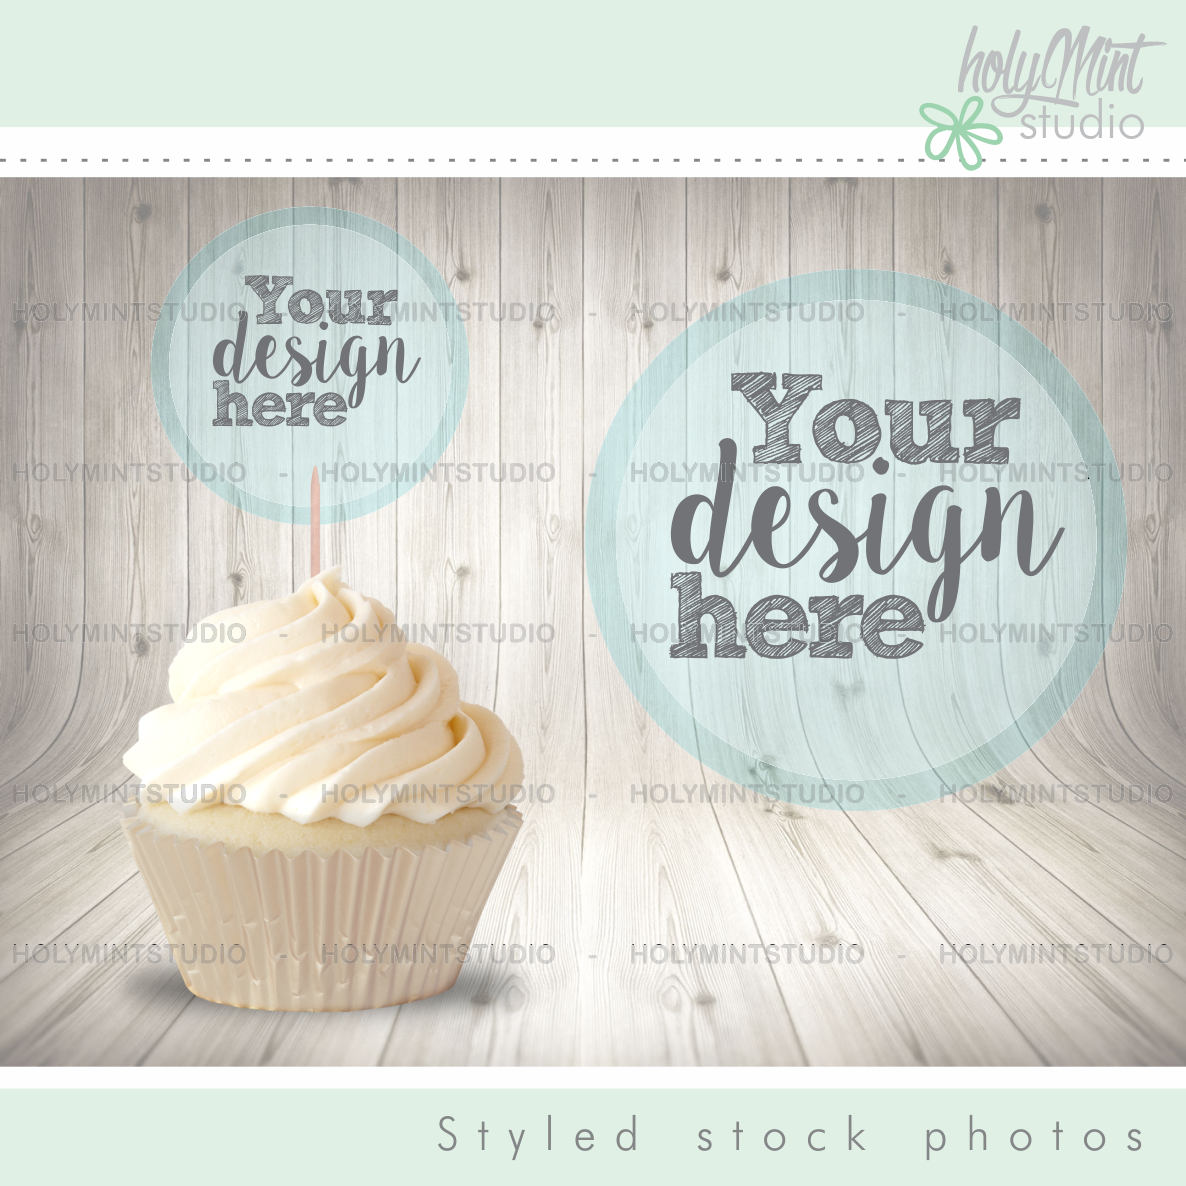 Download Cupcake Mockup Stock Photos Styled Stock Photography Food